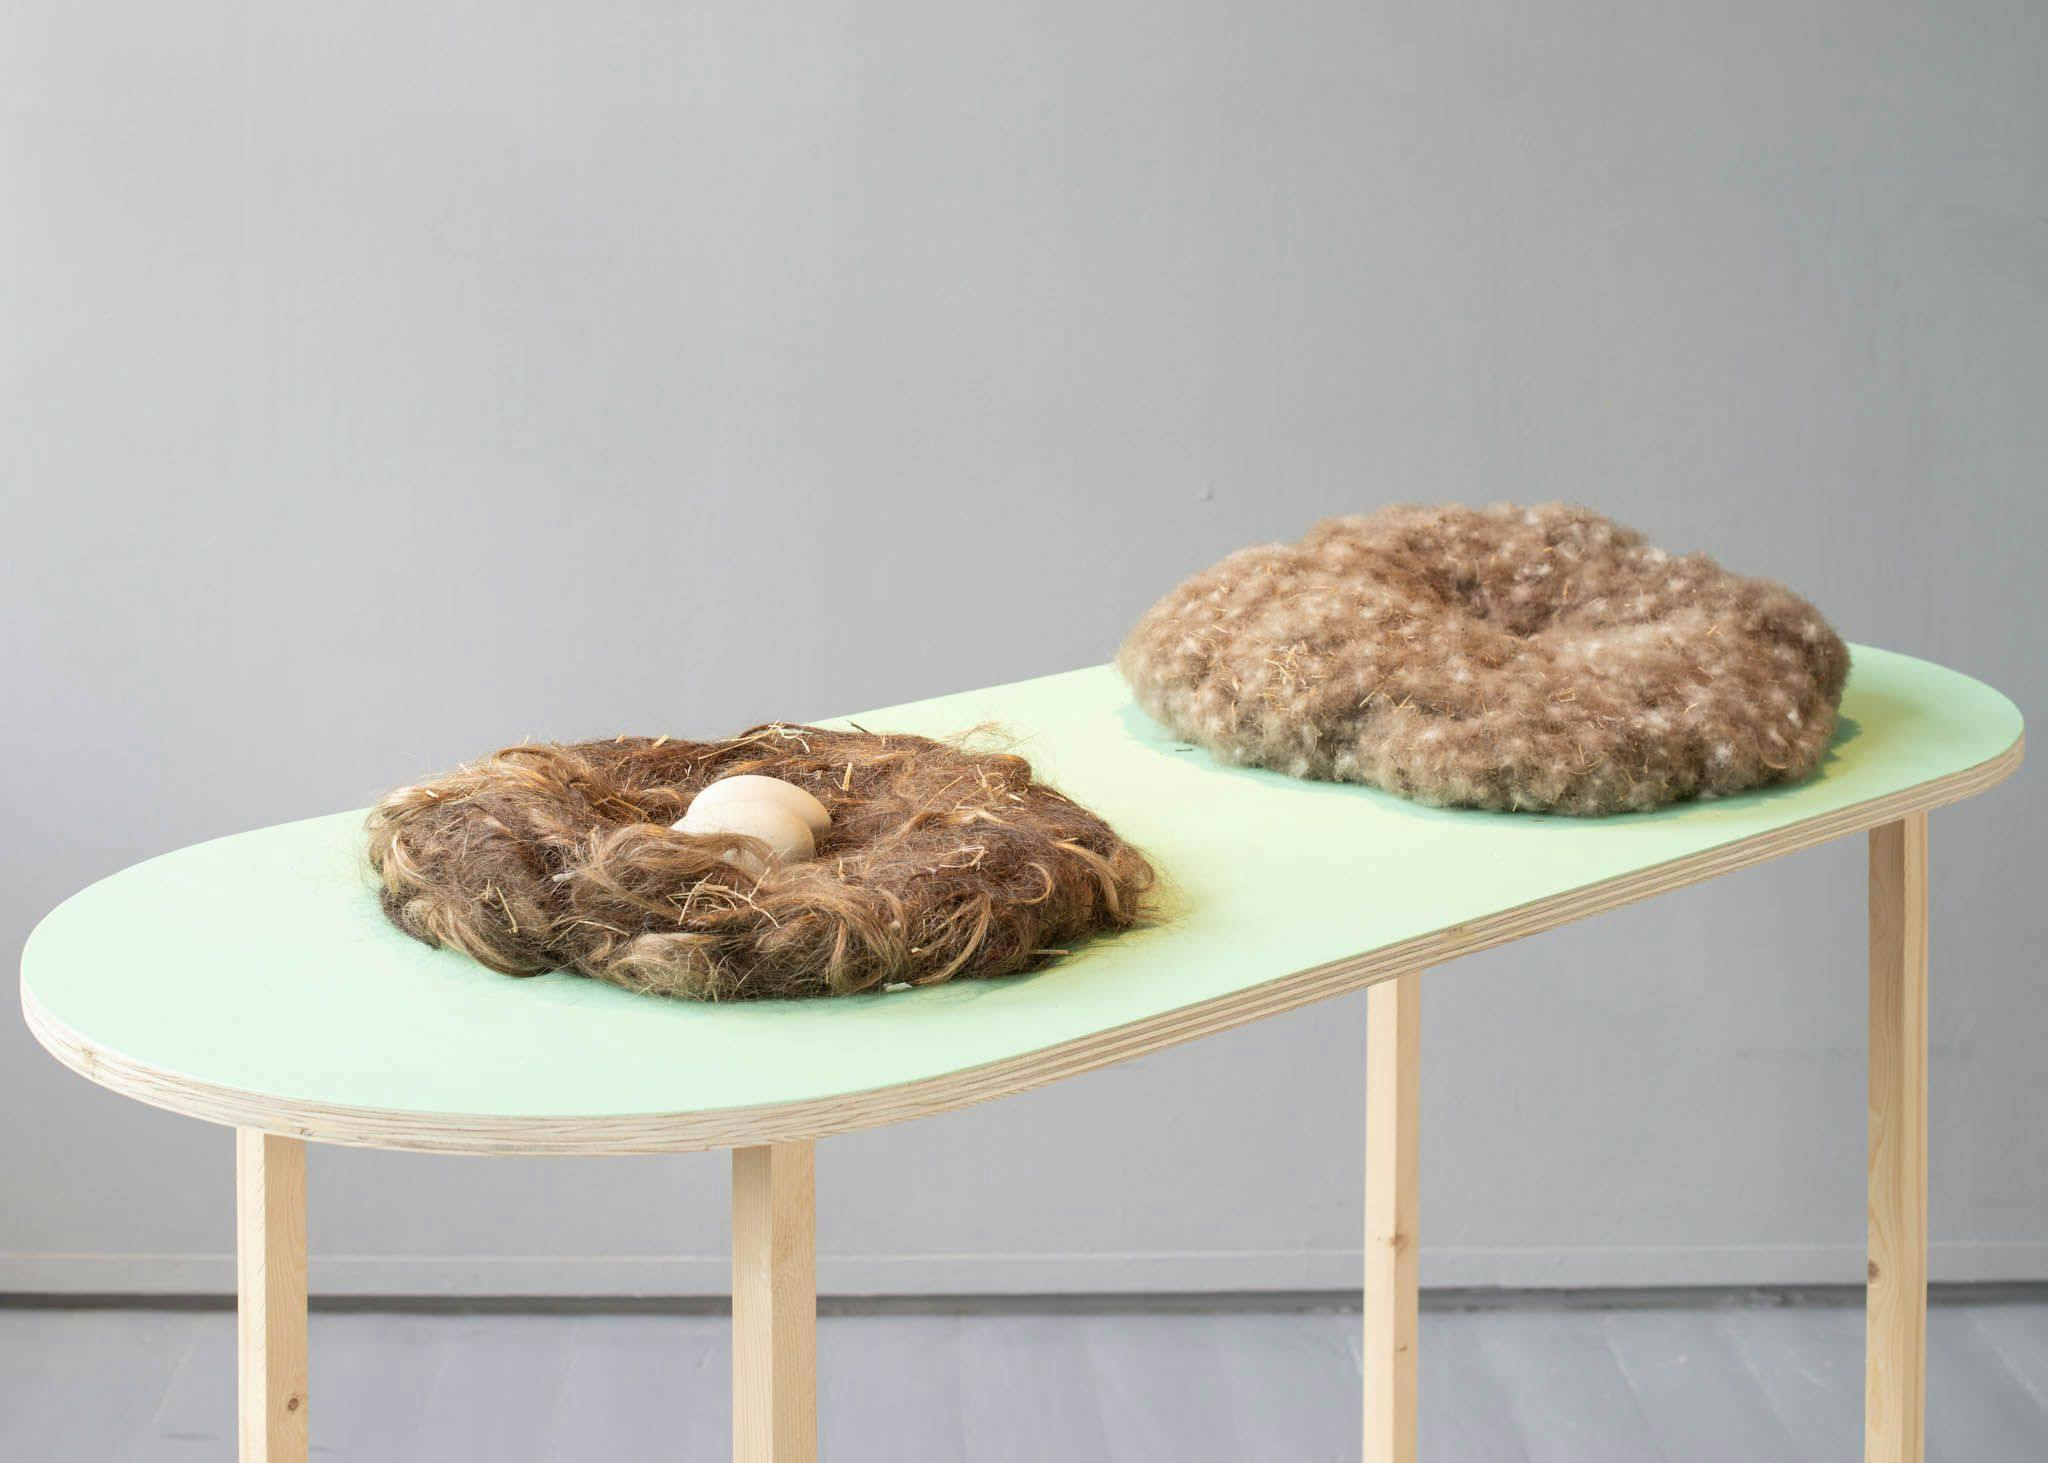 A minimalist mint-green table supports two nests made from down and feathers.